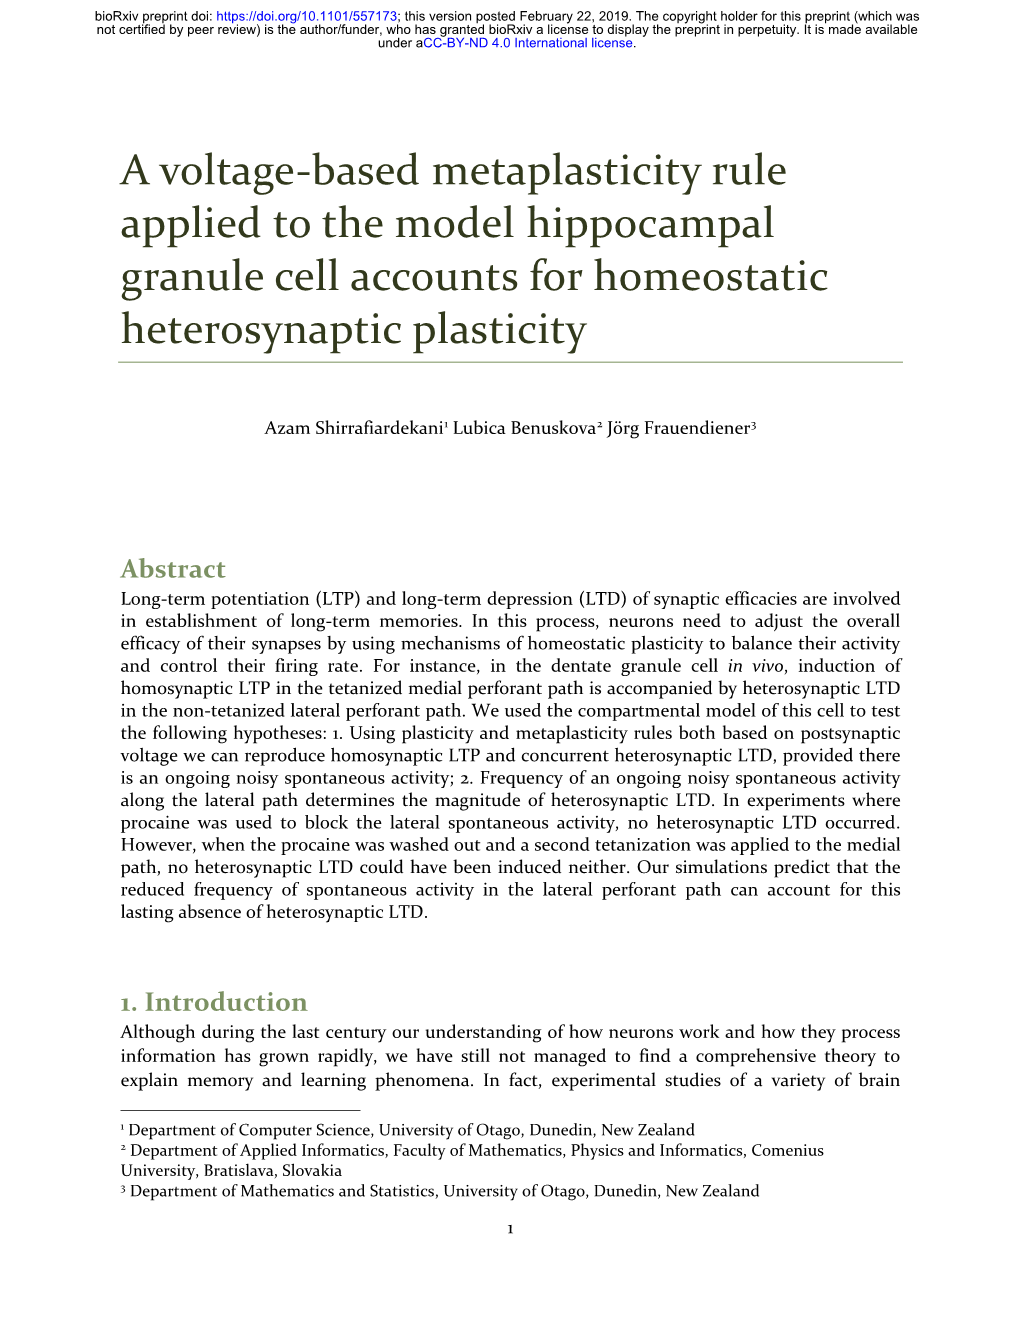 A Voltage-Based Metaplasticity Rule Applied to the Model Hippocampal Granule Cell Accounts for Homeostatic Heterosynaptic Plasticity